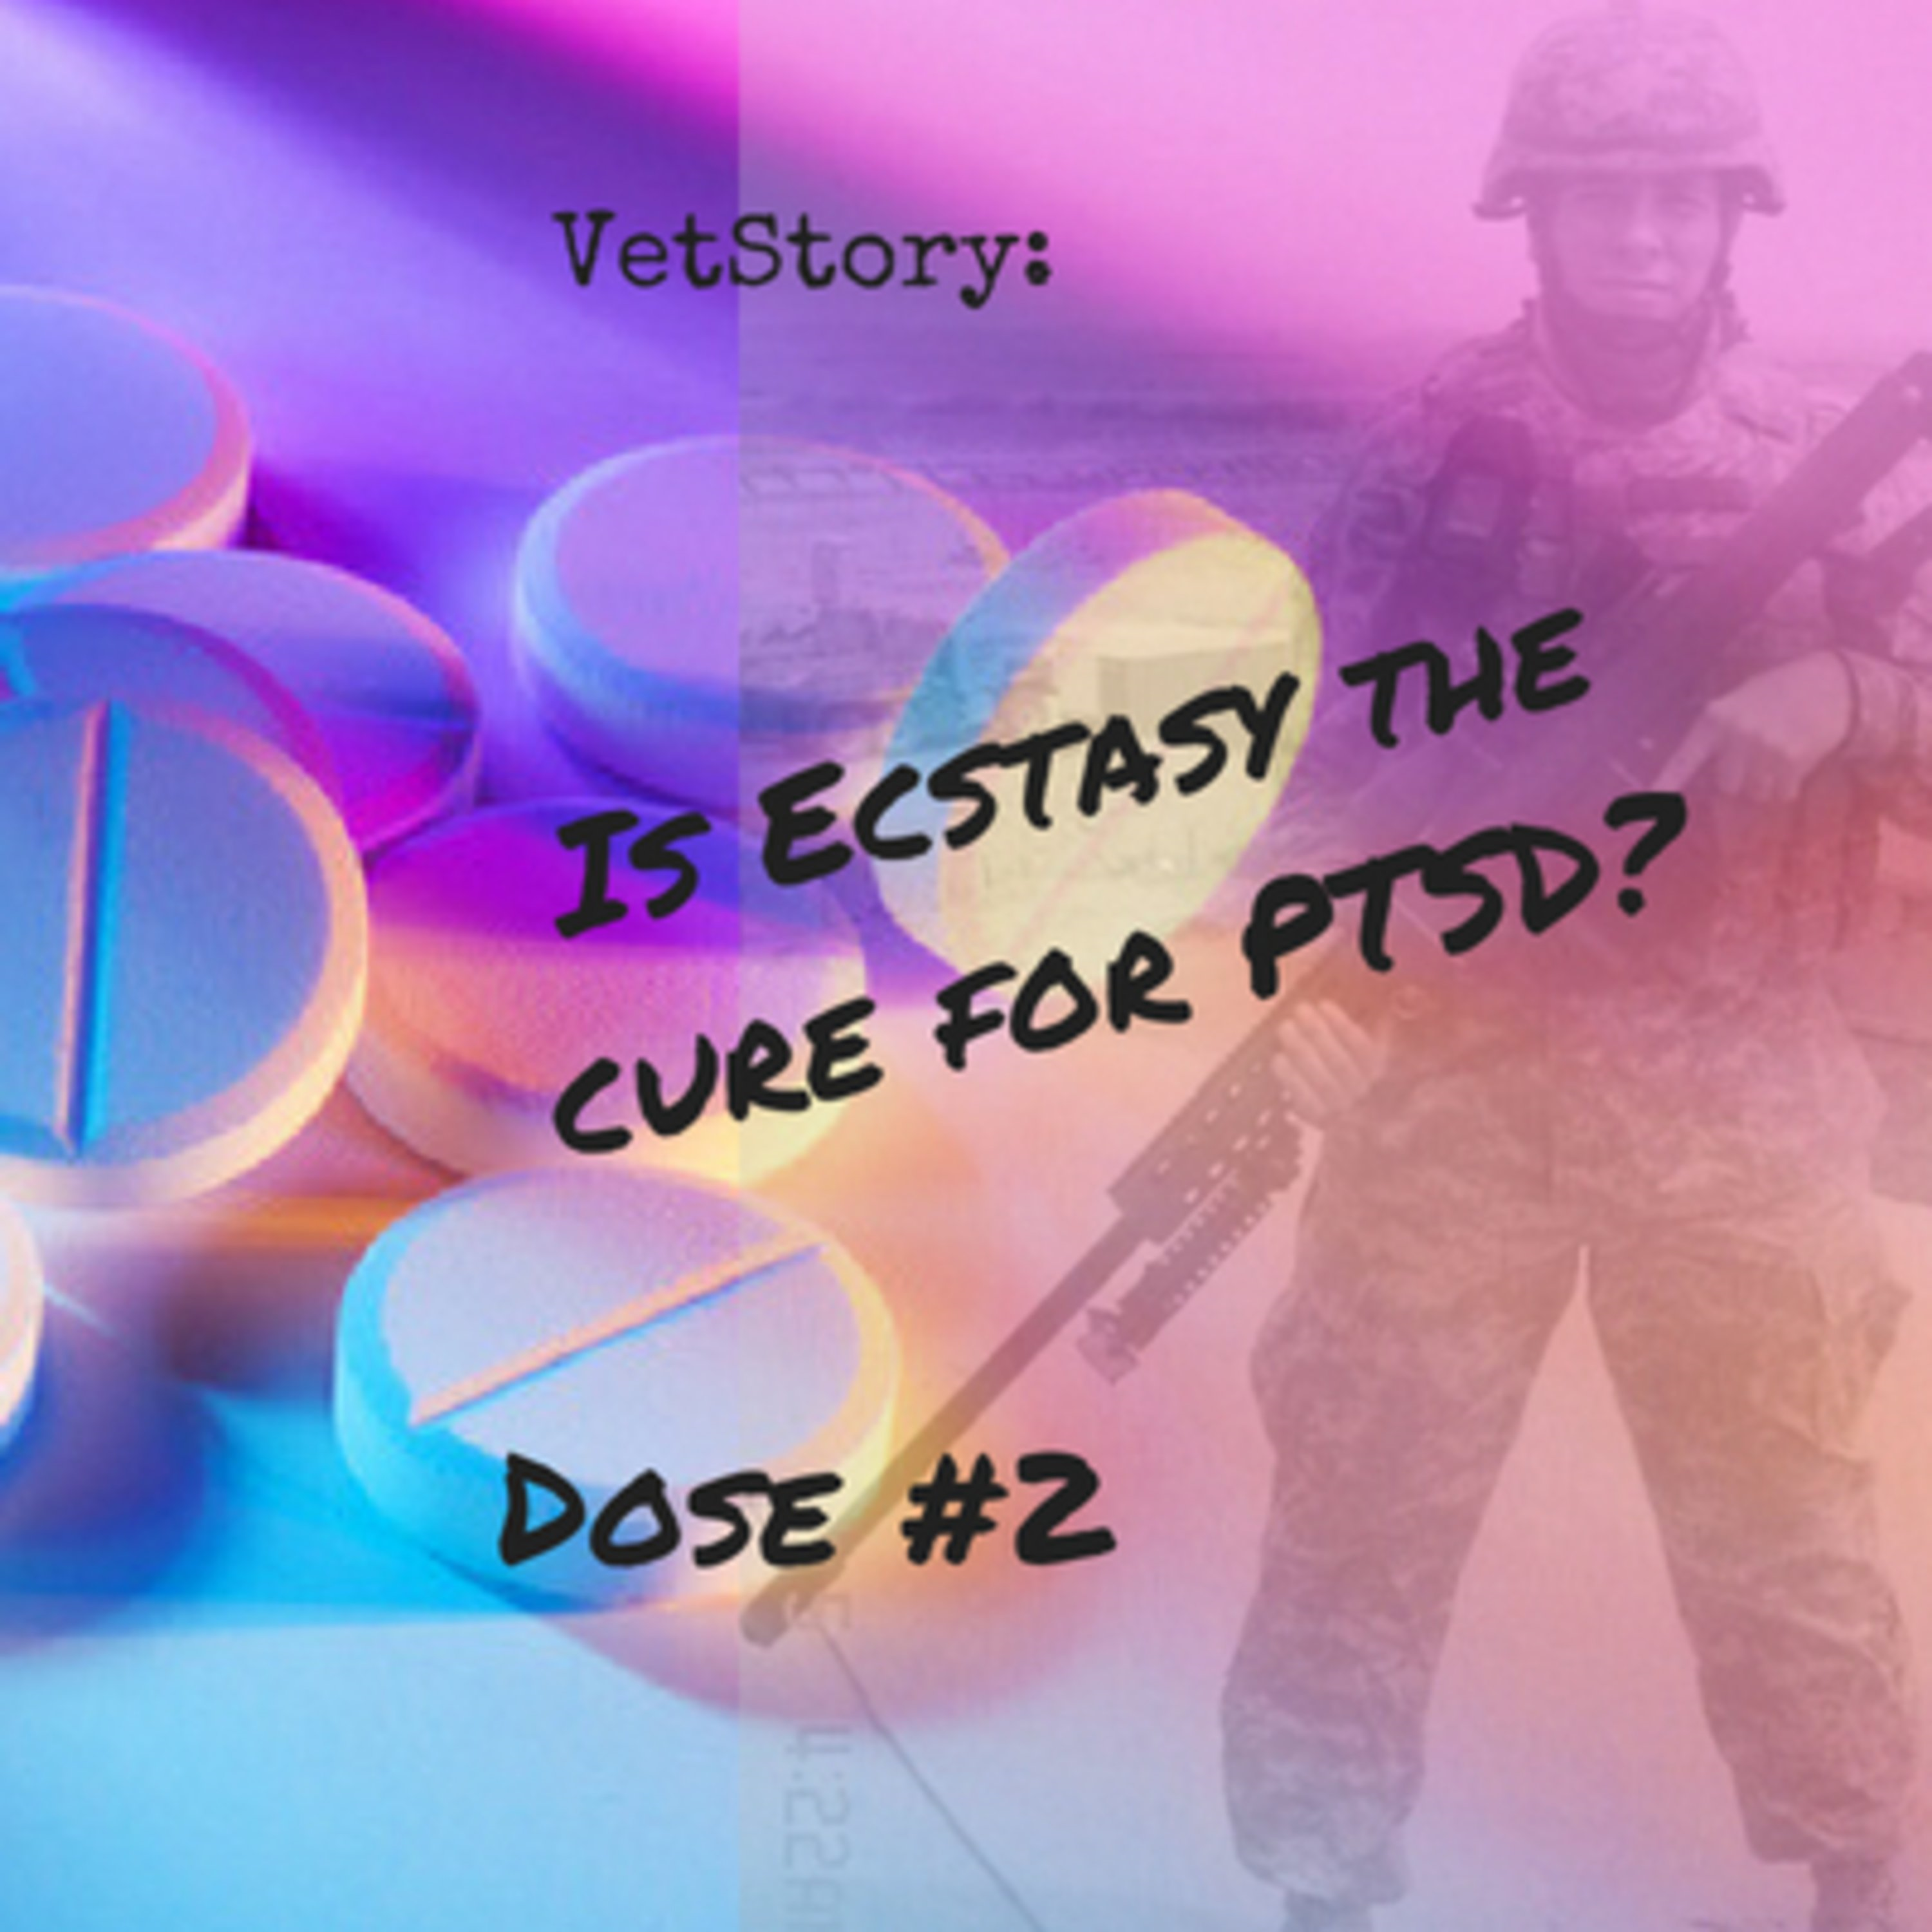 Is Ecstasy the cure for PTSD? Dose #2